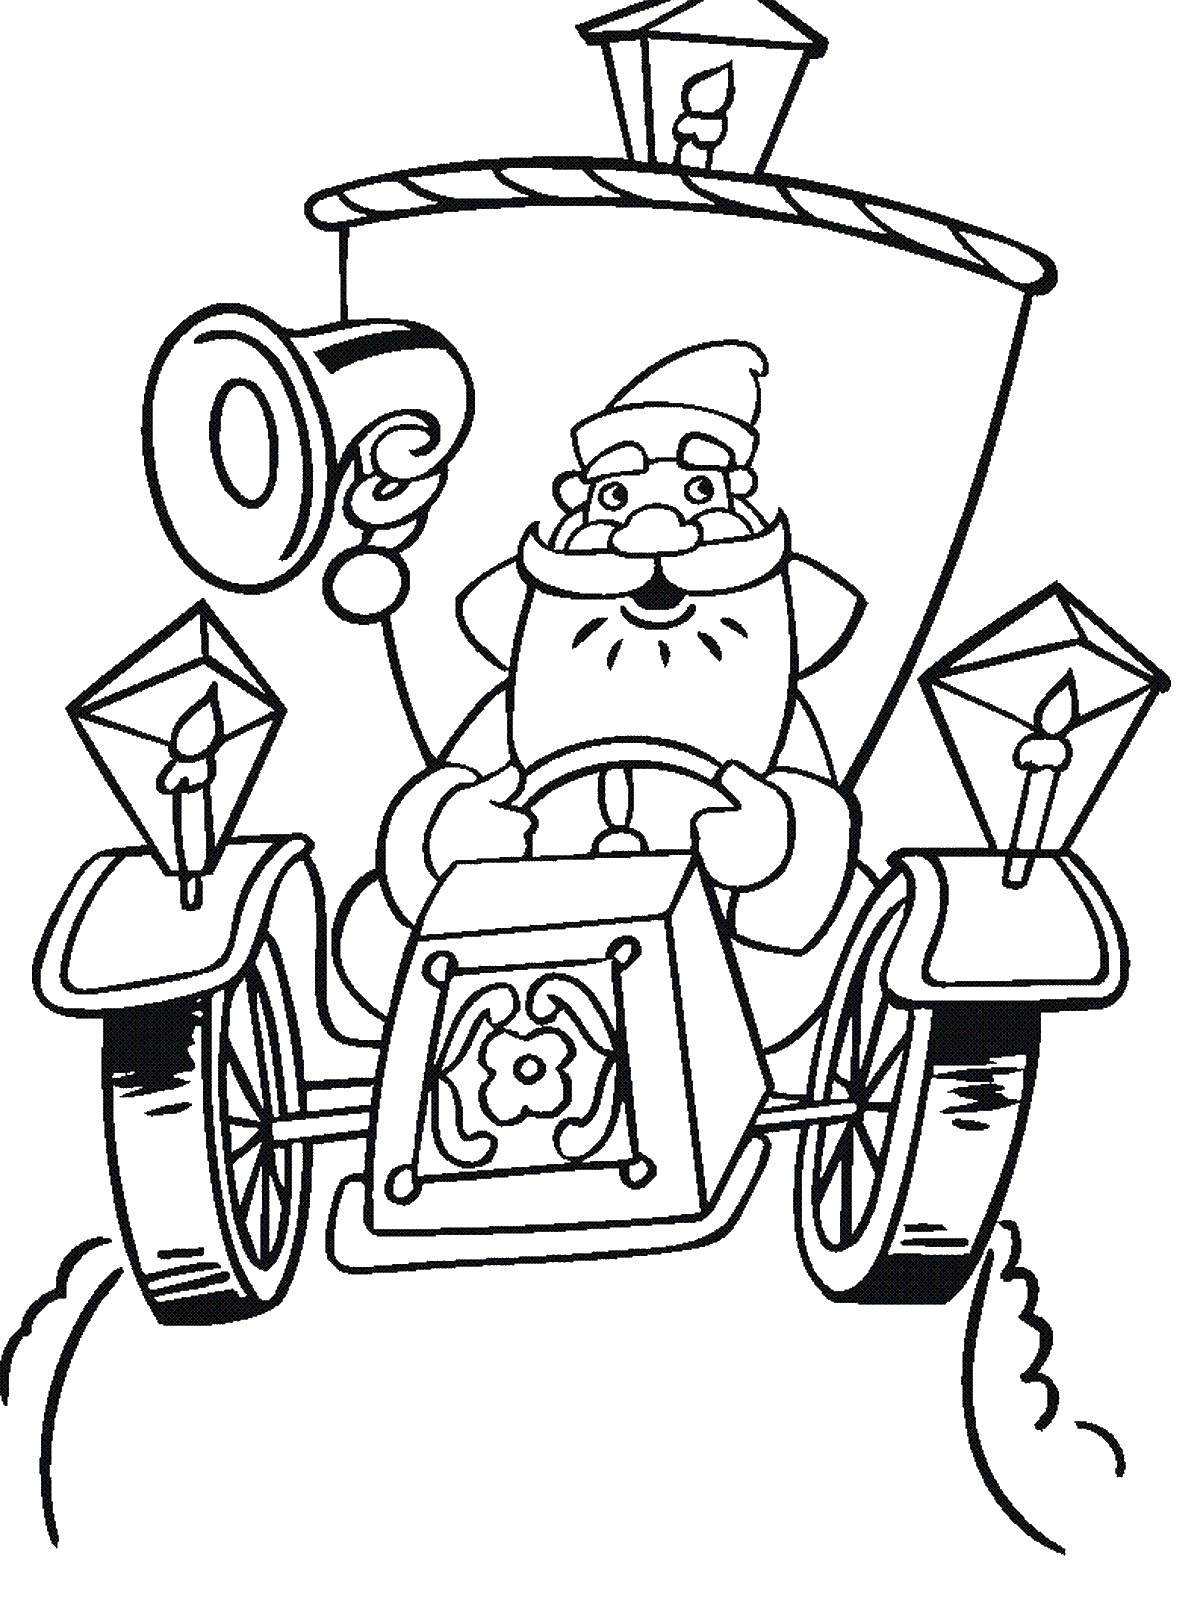 Coloring Santa Claus carrying gifts. Category new year. Tags:  New Year, Santa Claus, Santa Claus, gifts.